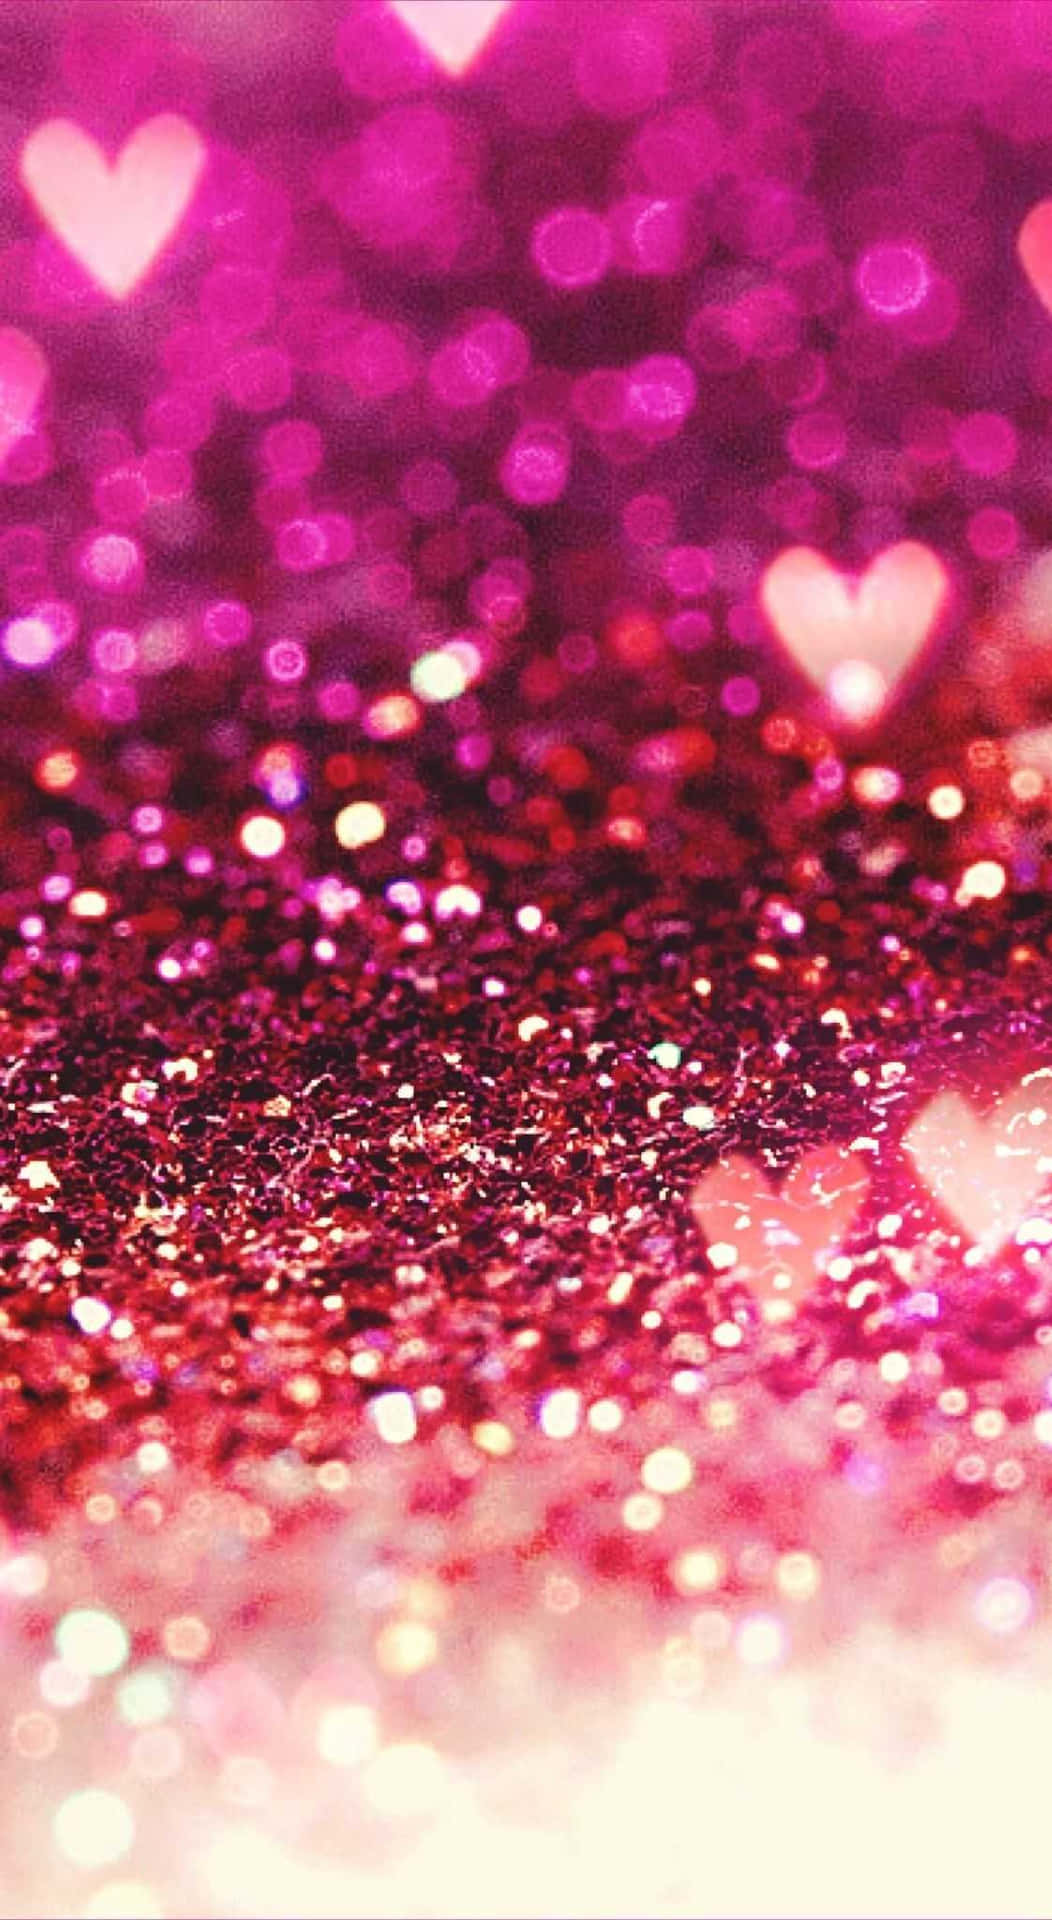 Romance In Every Pixel - Pink Heart Background